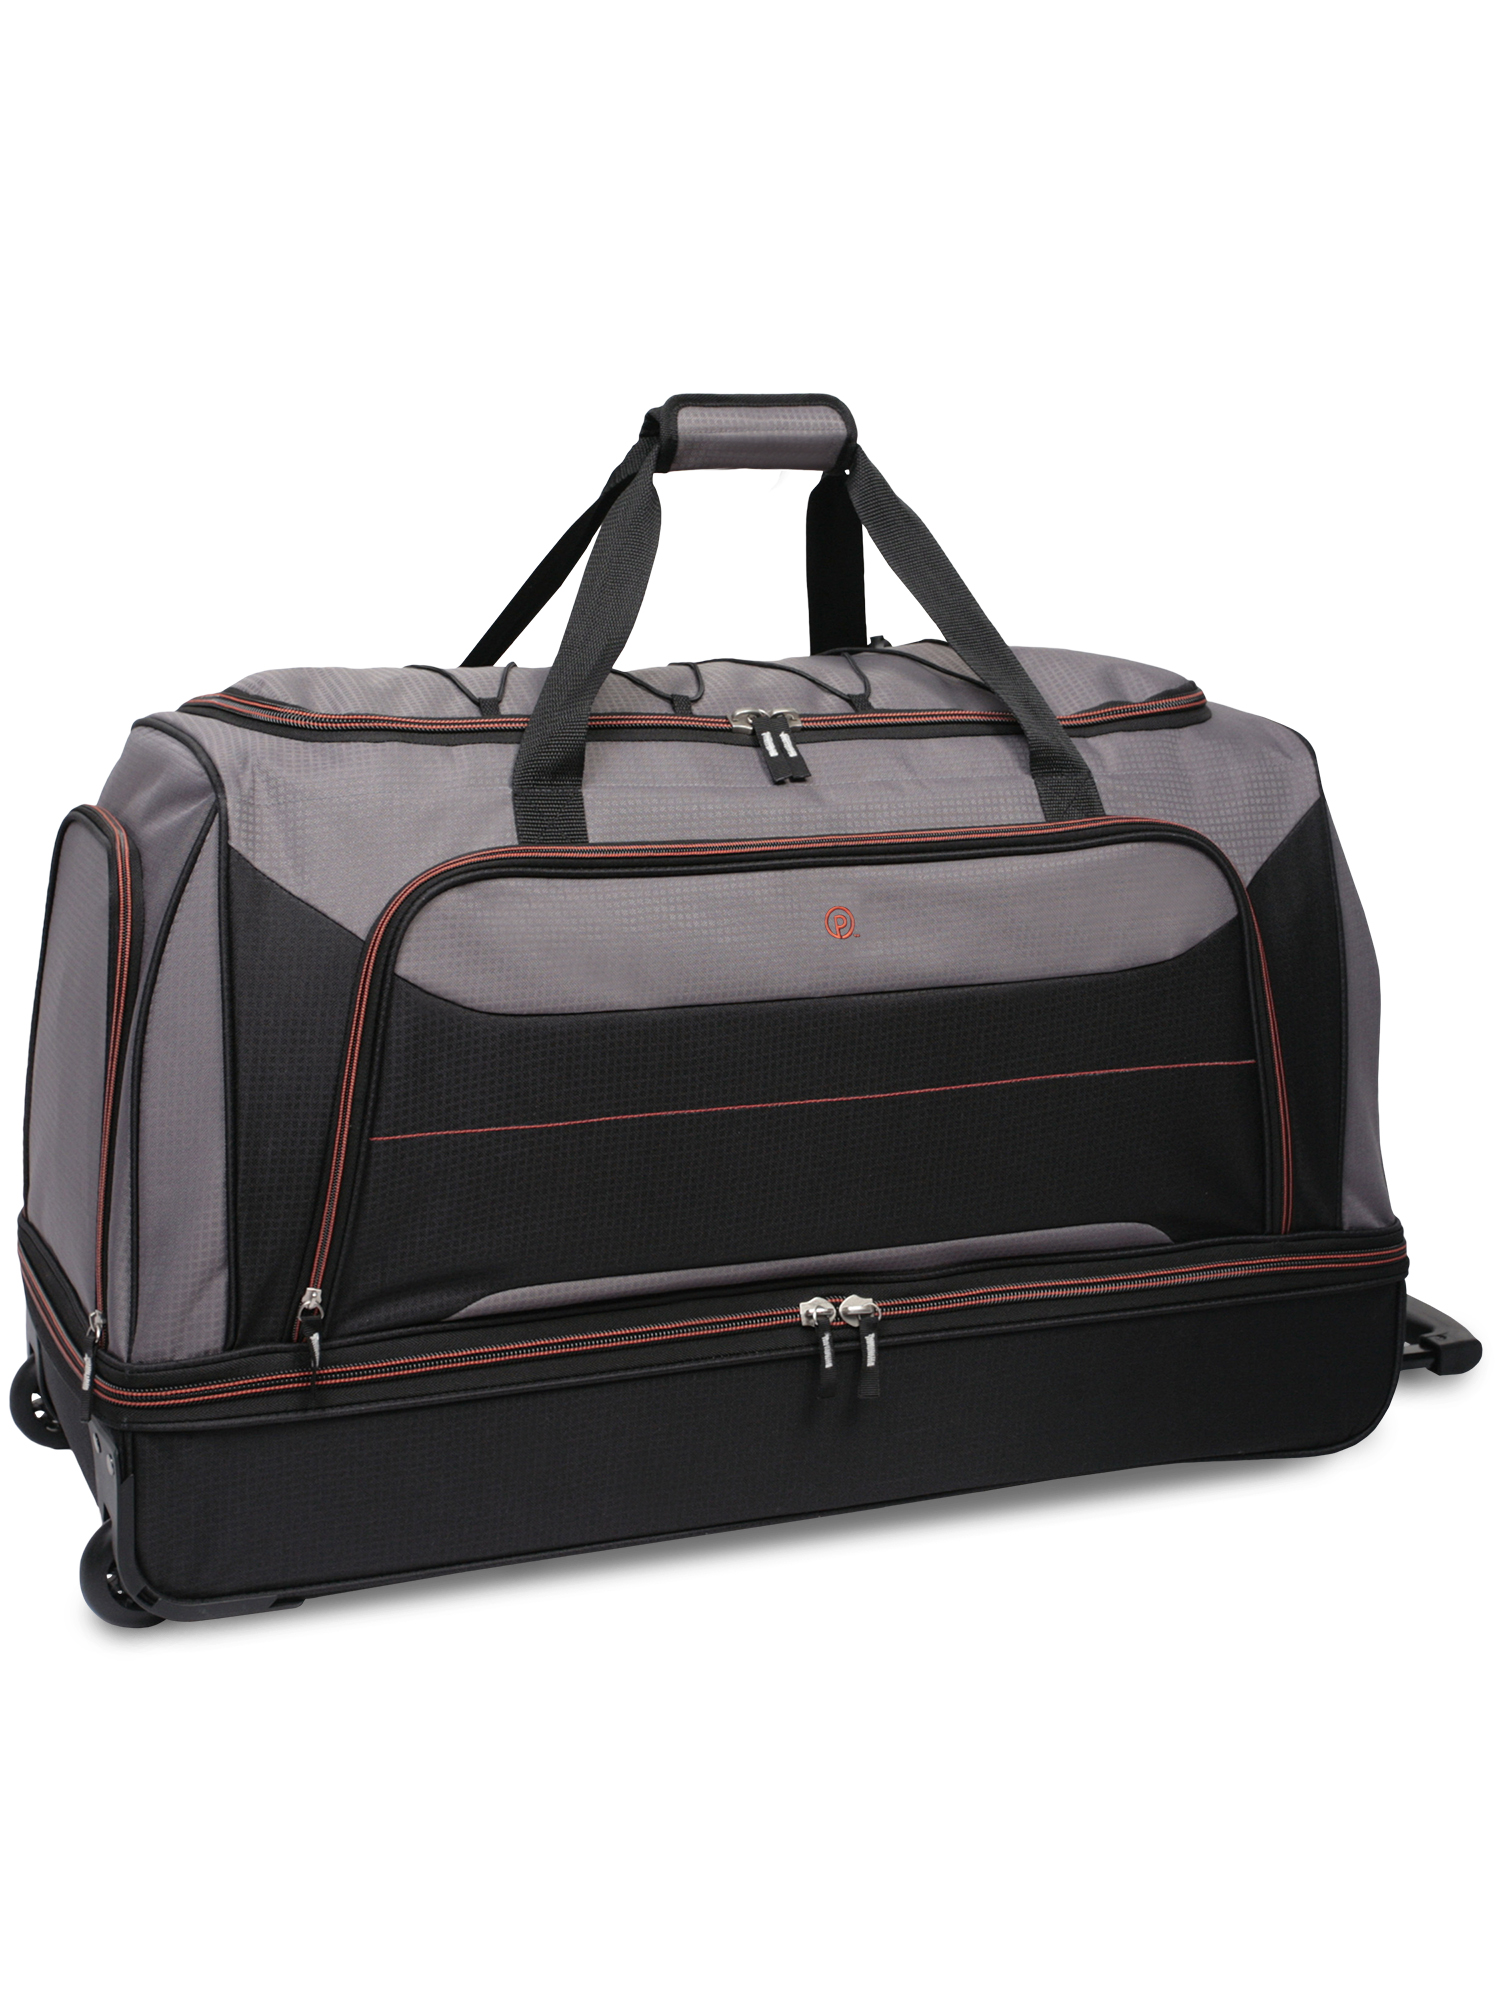 Protege Rolling Drop-Bottom Duffel Bag for Travel, 30 in, Black and Grey - image 3 of 8